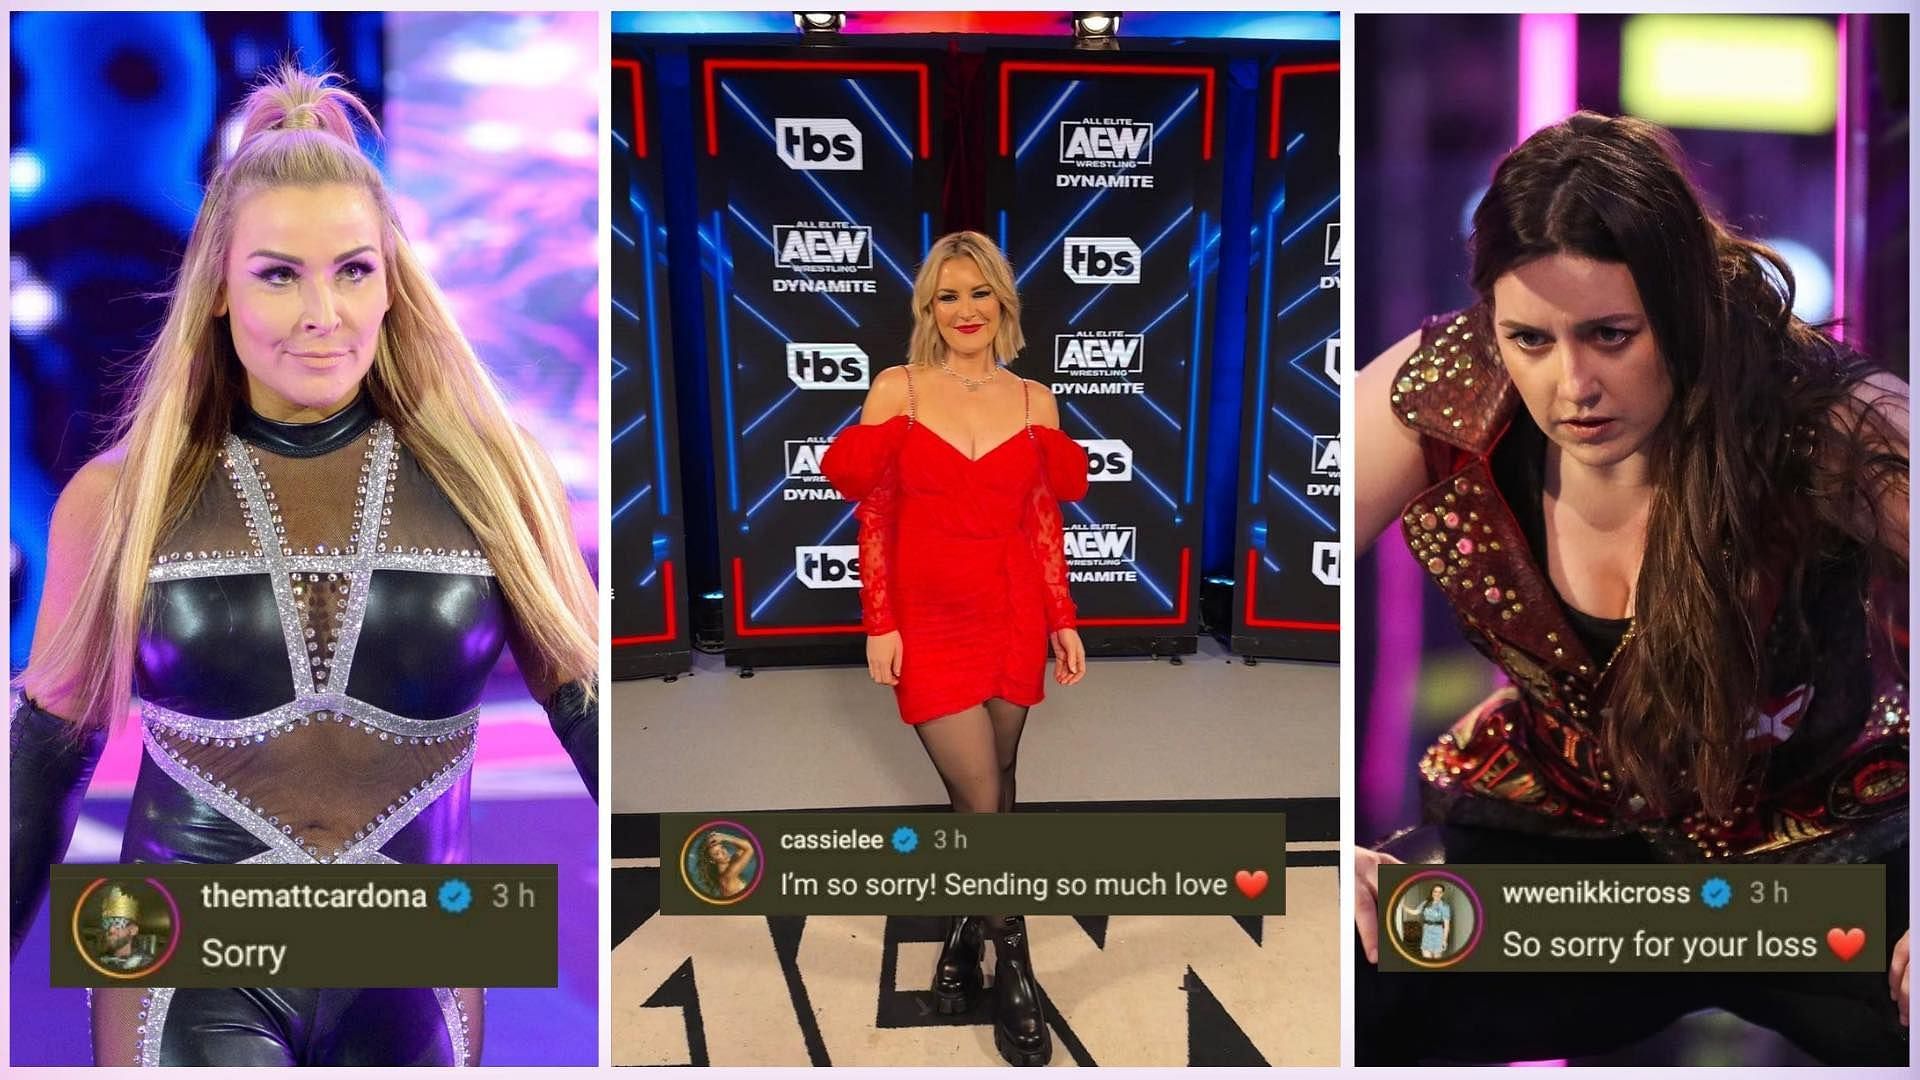 An AEW star received heartfelt messages from her colleagues as well as from WWE personalities